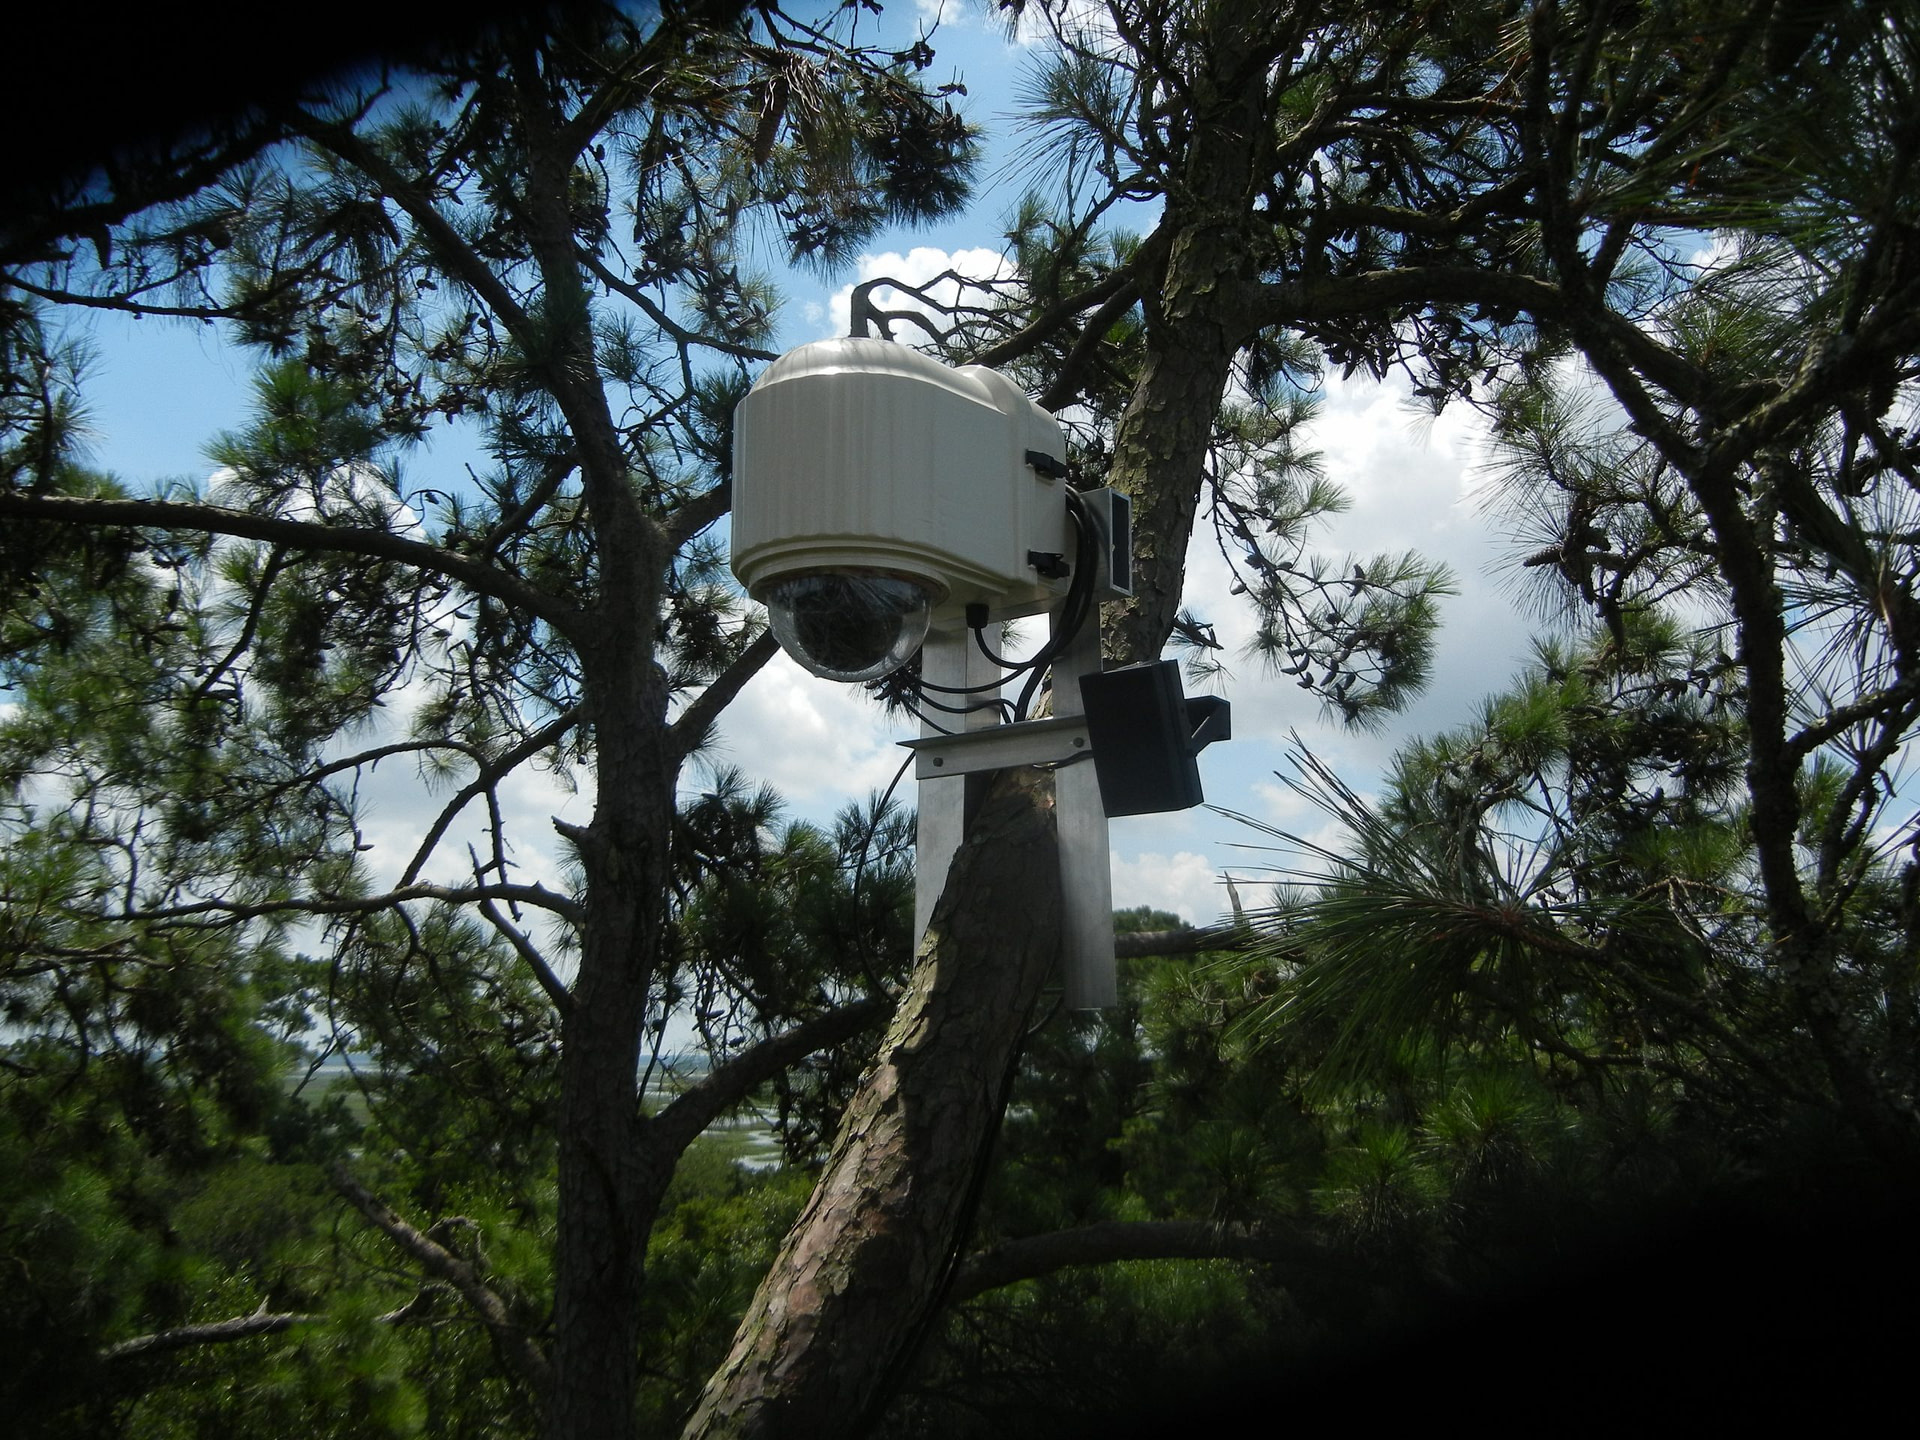 XHeat Climate Controlled PTZ Camera Enclosure System For Extreme Cold Conditions Installed In A Tree Overlooking A Bald Eagles Nest In Savannah Georgia 